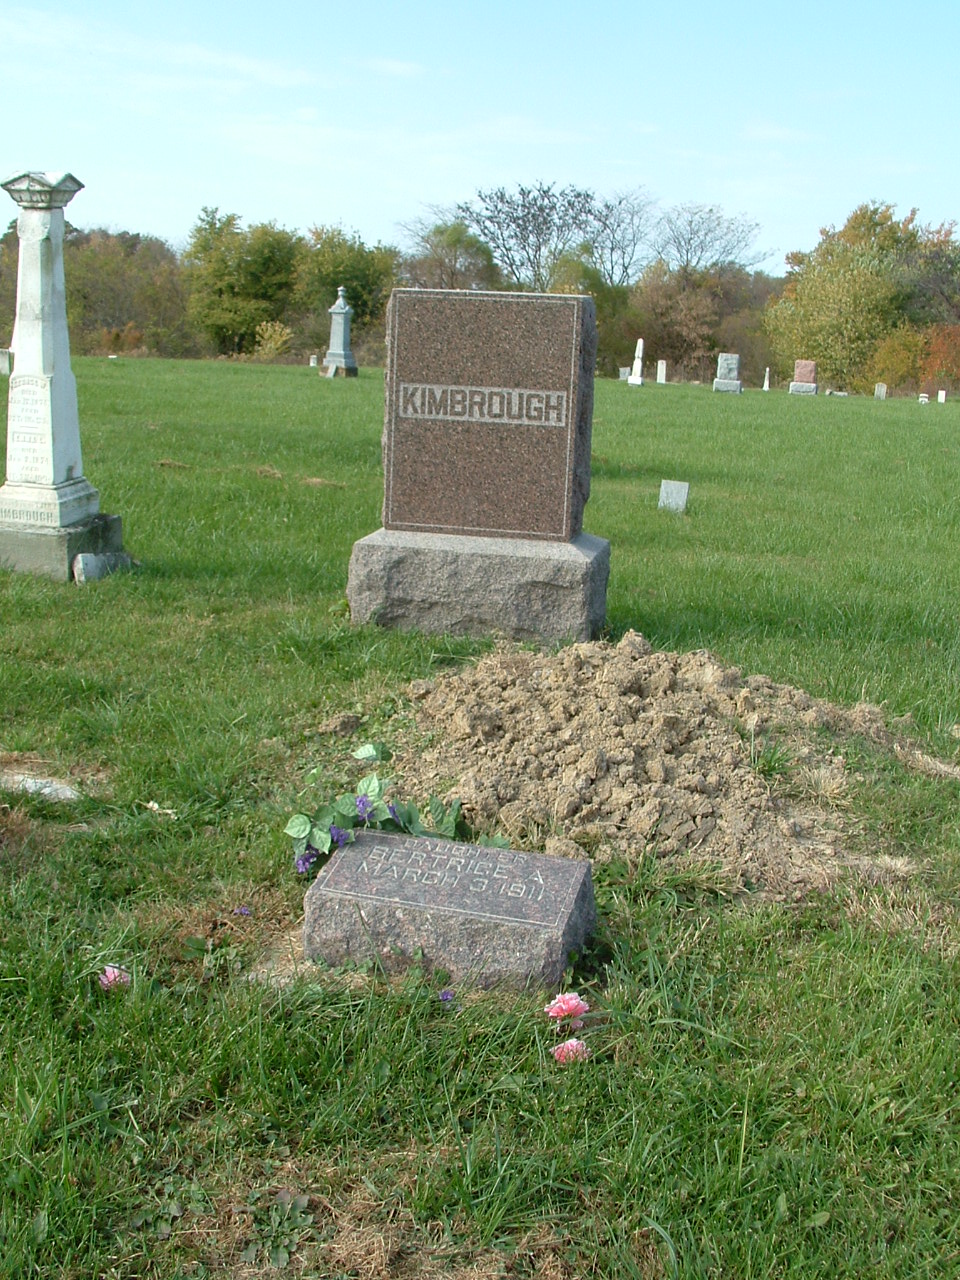 Grave of Bertrice Kimbrough Gray - buried in Dec 2009